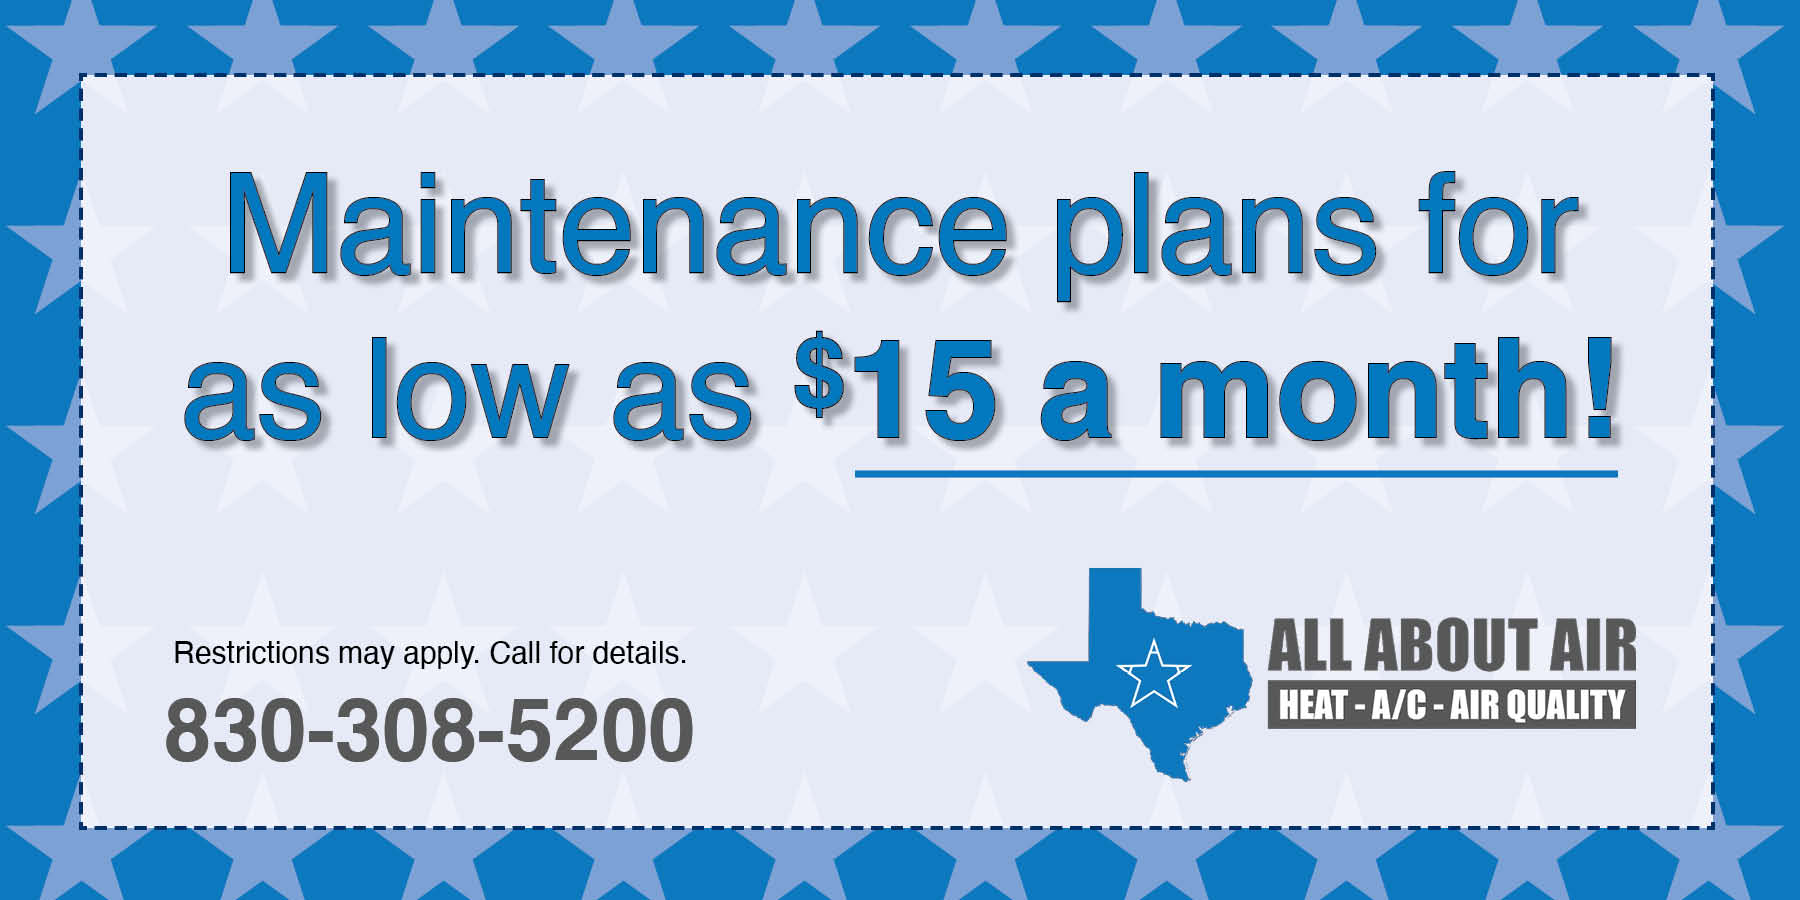 Coupon for Maintenance plans starting as low as  a month. Call now 830-308-5200